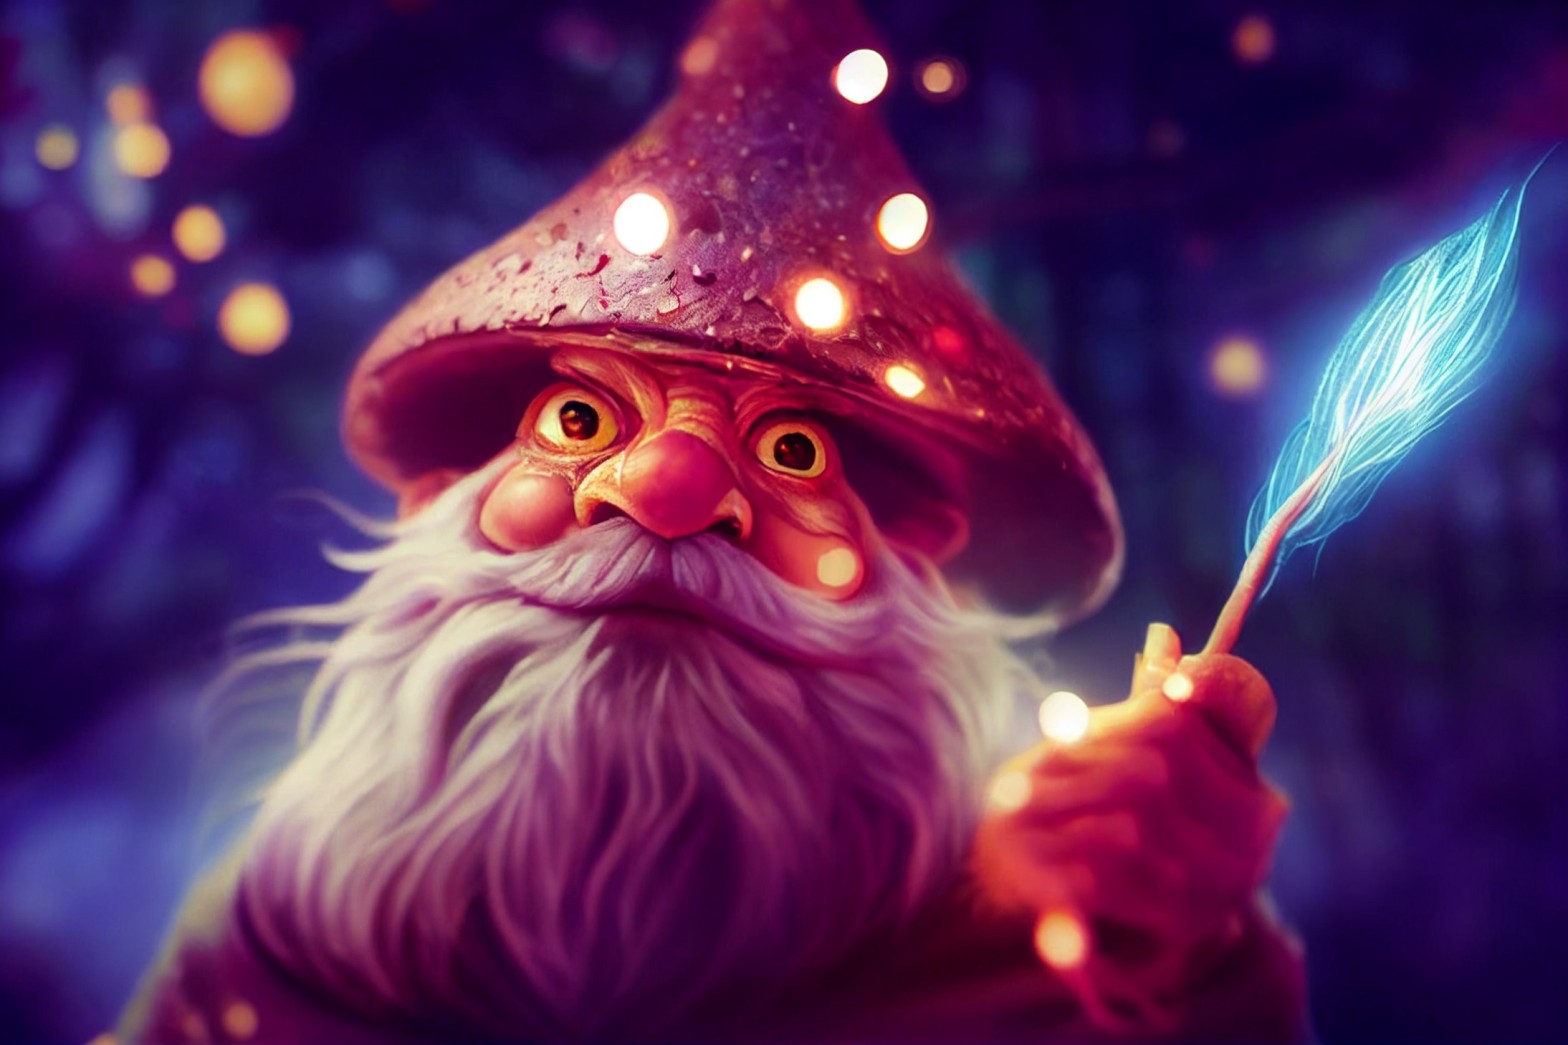 Extreme facial closeup of a Fantastical Wizard casting a spell on a frog and toadstool. Fantasy. Exterior. Forest. Forestcore. Tall trees in the background. Twilight. Photorealistic. Arstation style. , Light Art, Kodak Portra, Lens Flare, Light, 3D, Rim Lighting, Christmas Lights, Flare, Ray Traced, Ray Tracing Ambient Occlusion, Anti-Aliasing, Tone Mapping, VFX, insanely detailed and intricate, hypermaximalist, elegant, ornate, hyper realistic, super detailed,